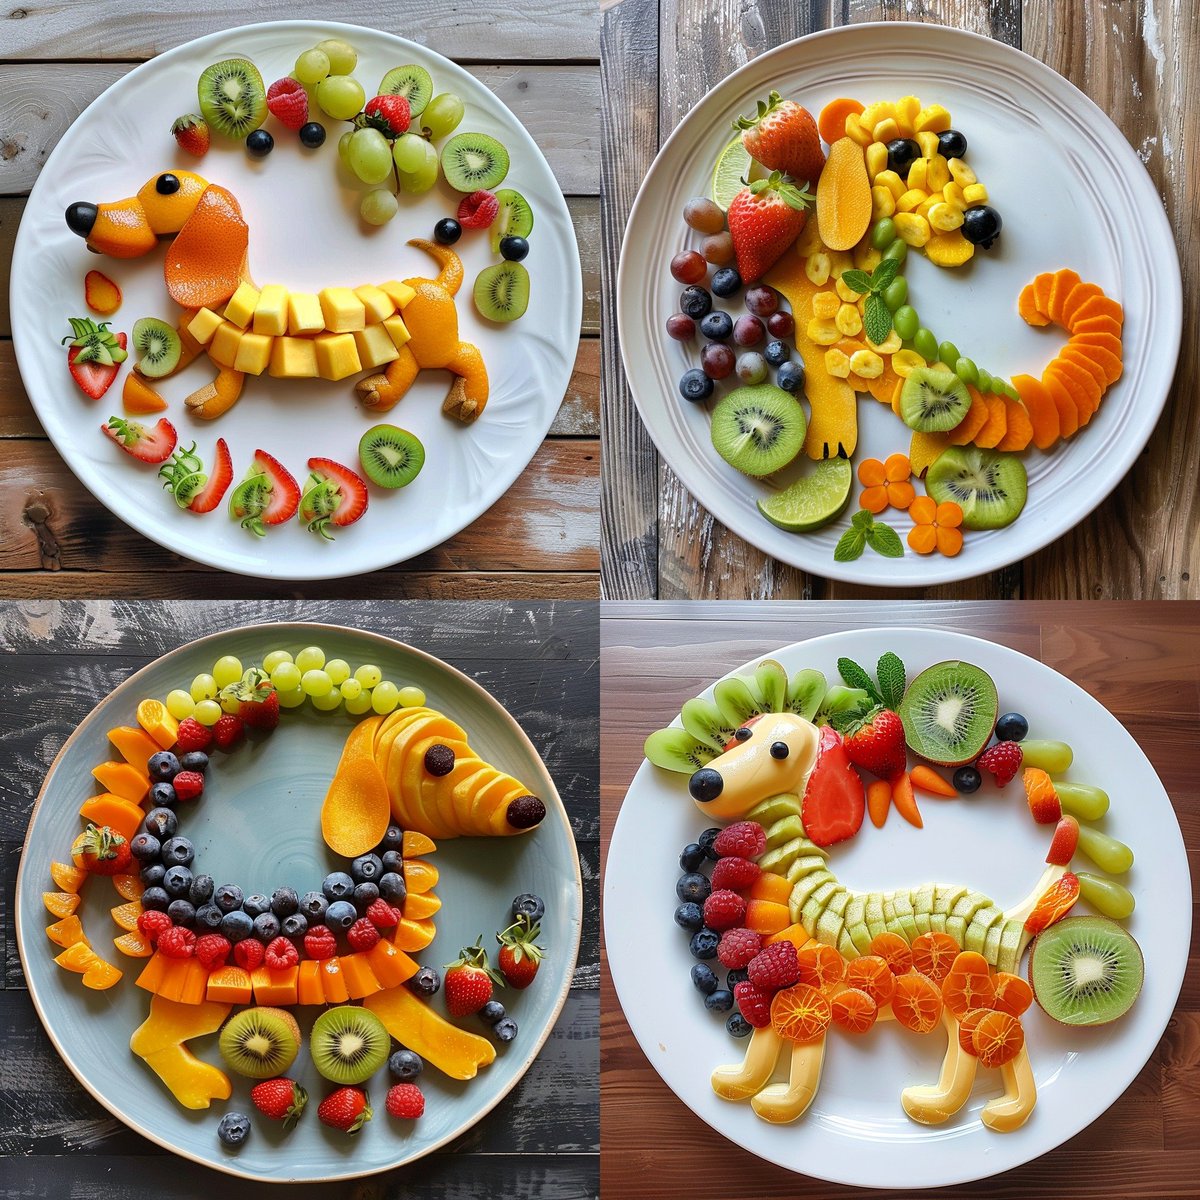 Dachshunds Made From Fruit 😍😍😍